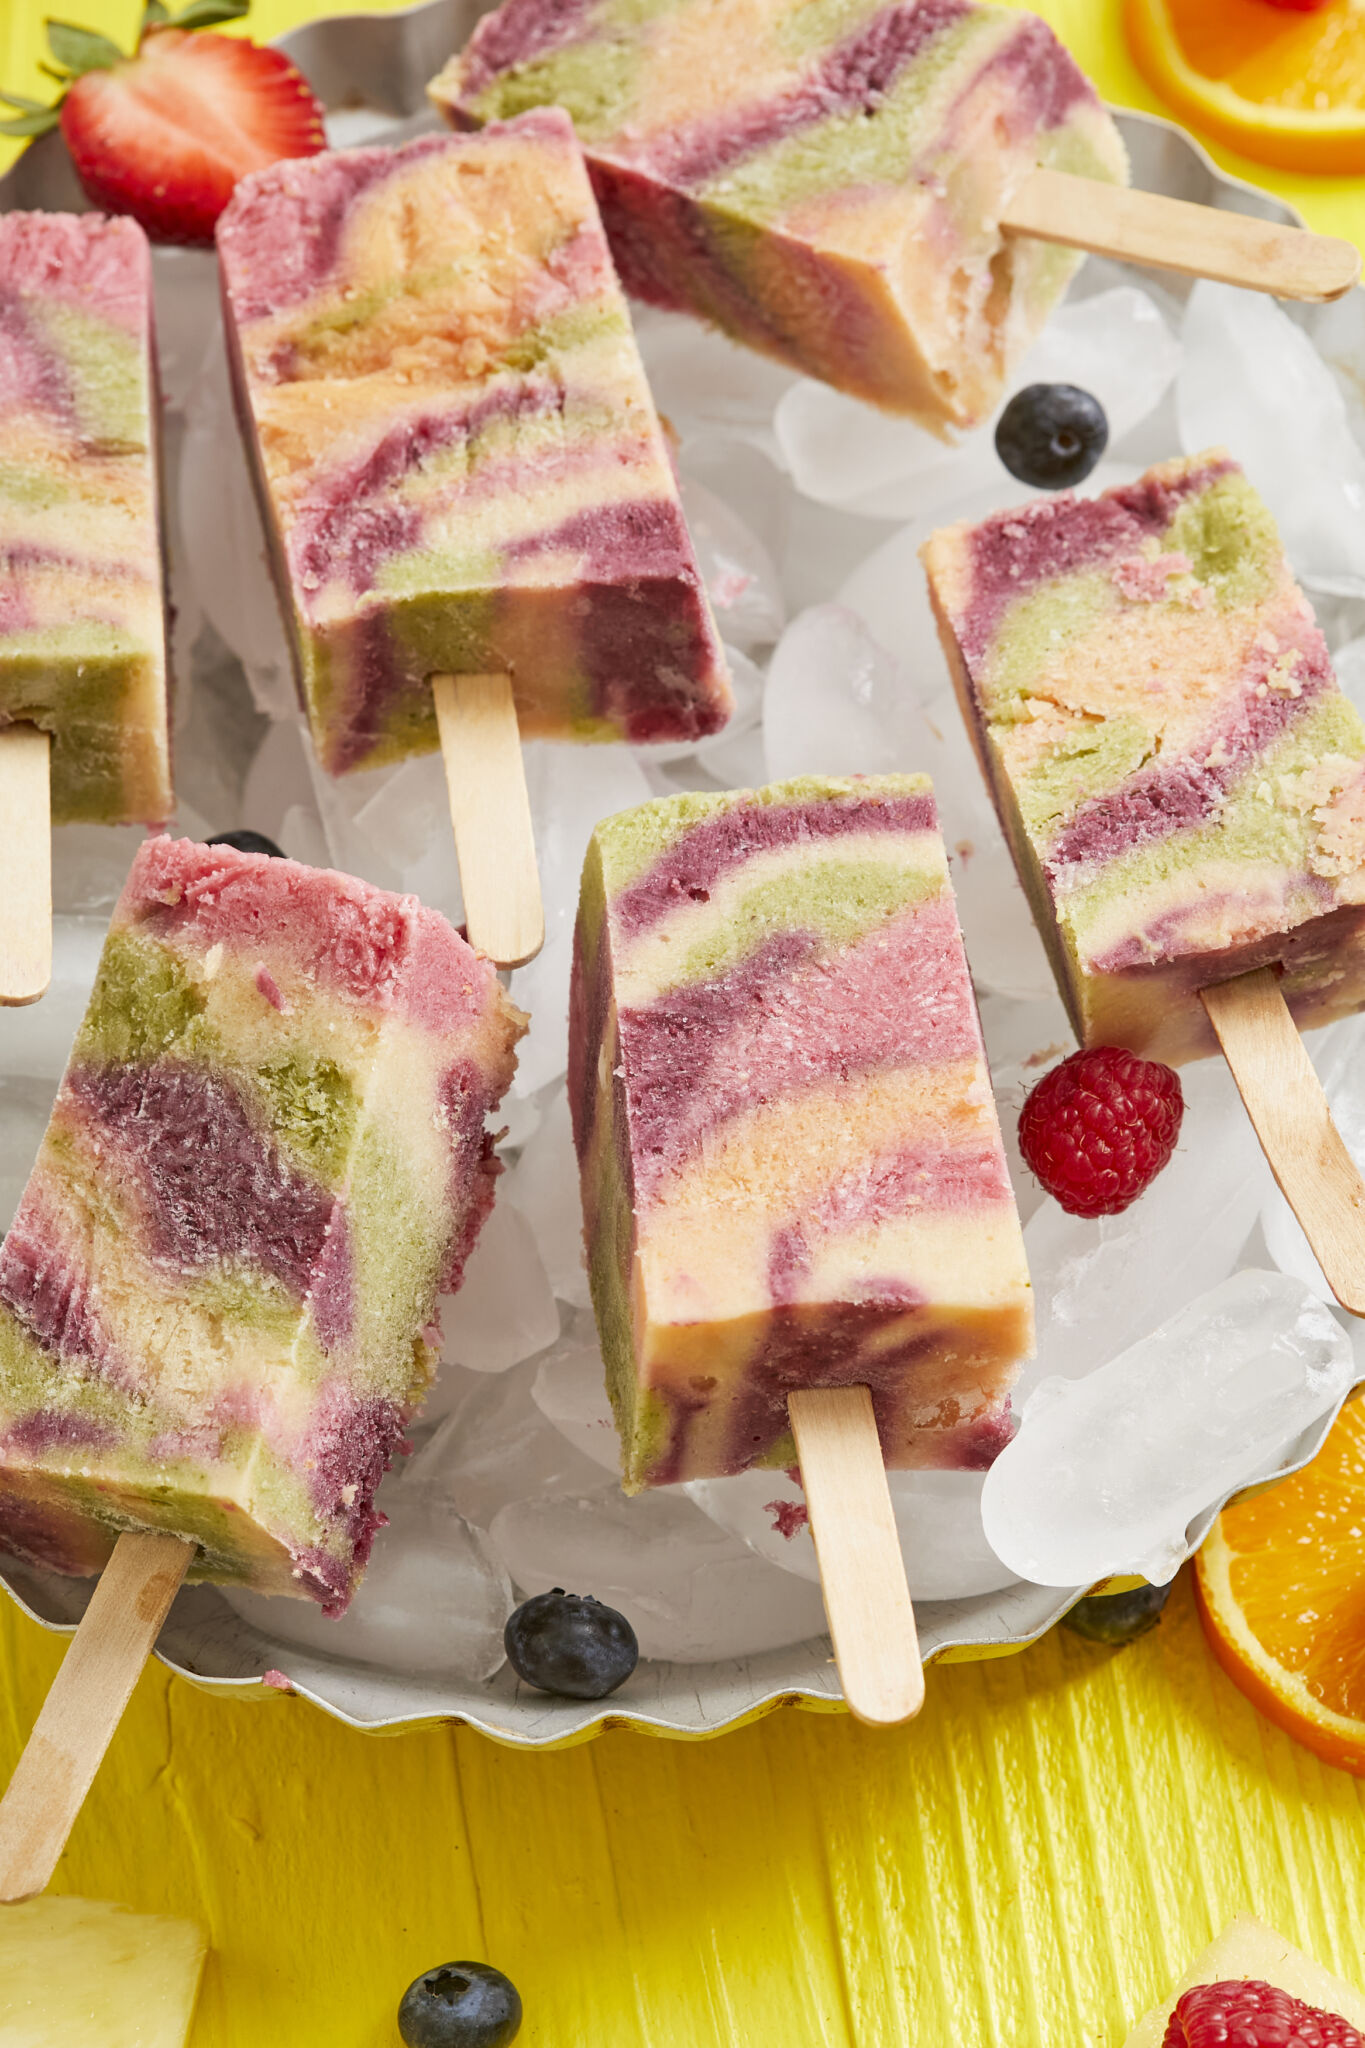 The all-natural frozen treats are in a beautiful tie-dye pattern with red, pink, yellow and green colors, served on ice cubes in a metal pie pan, with blueberries, raspberries and orange slices on the side.